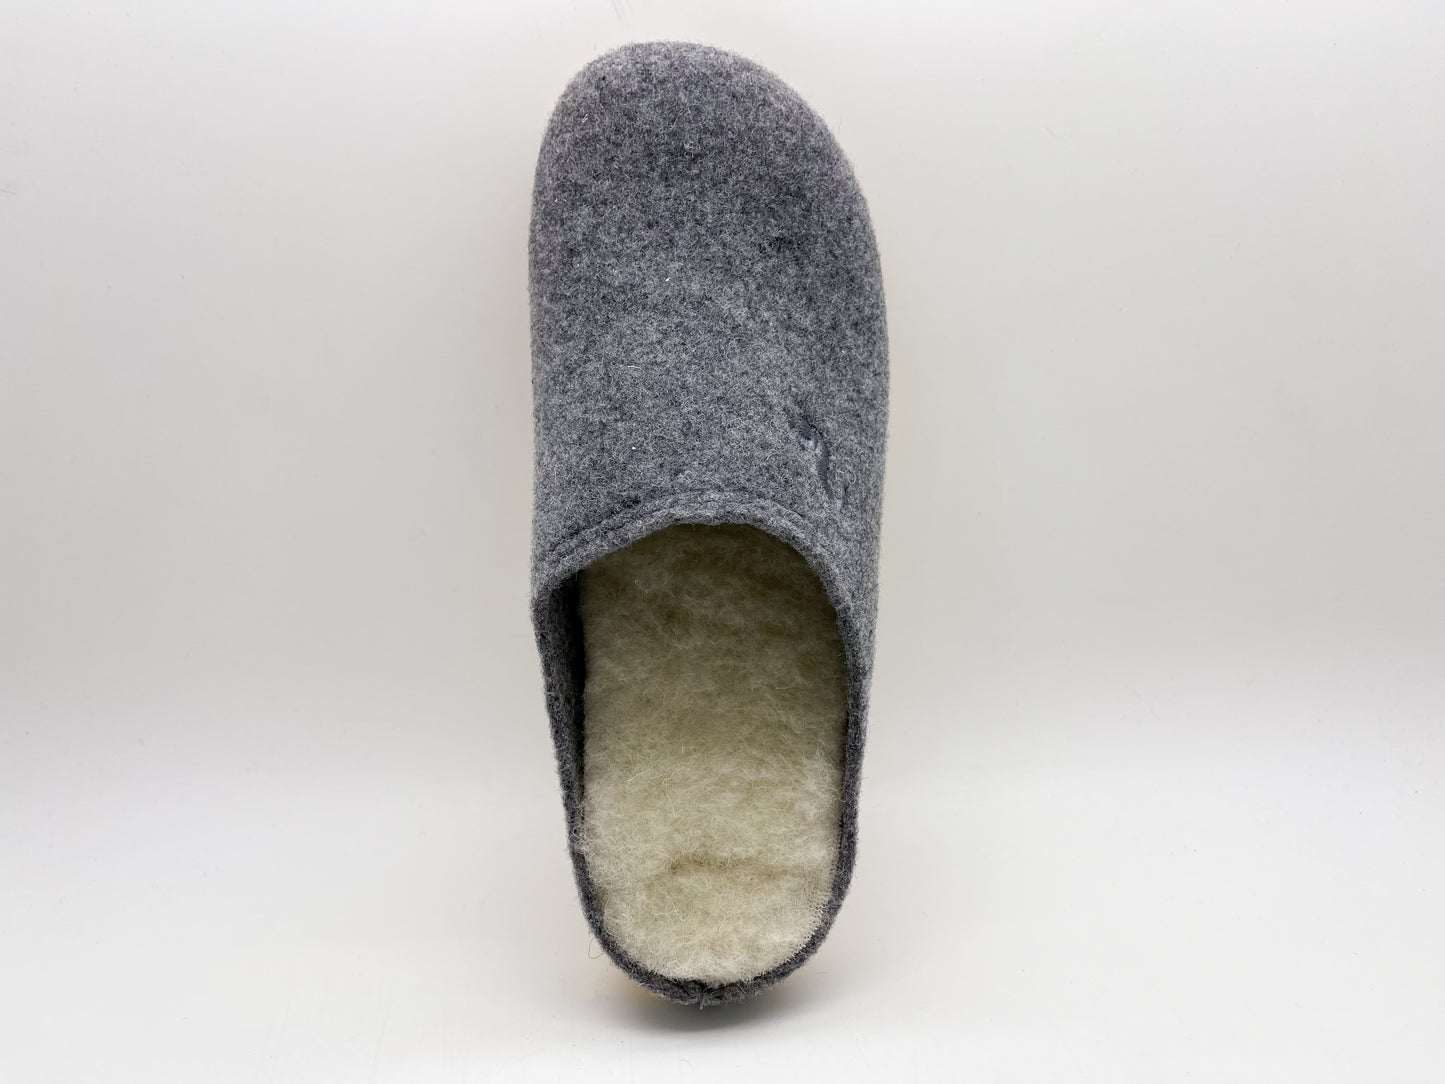 thies 1856 ® Recycled Wool Slippers grey yellow (W)